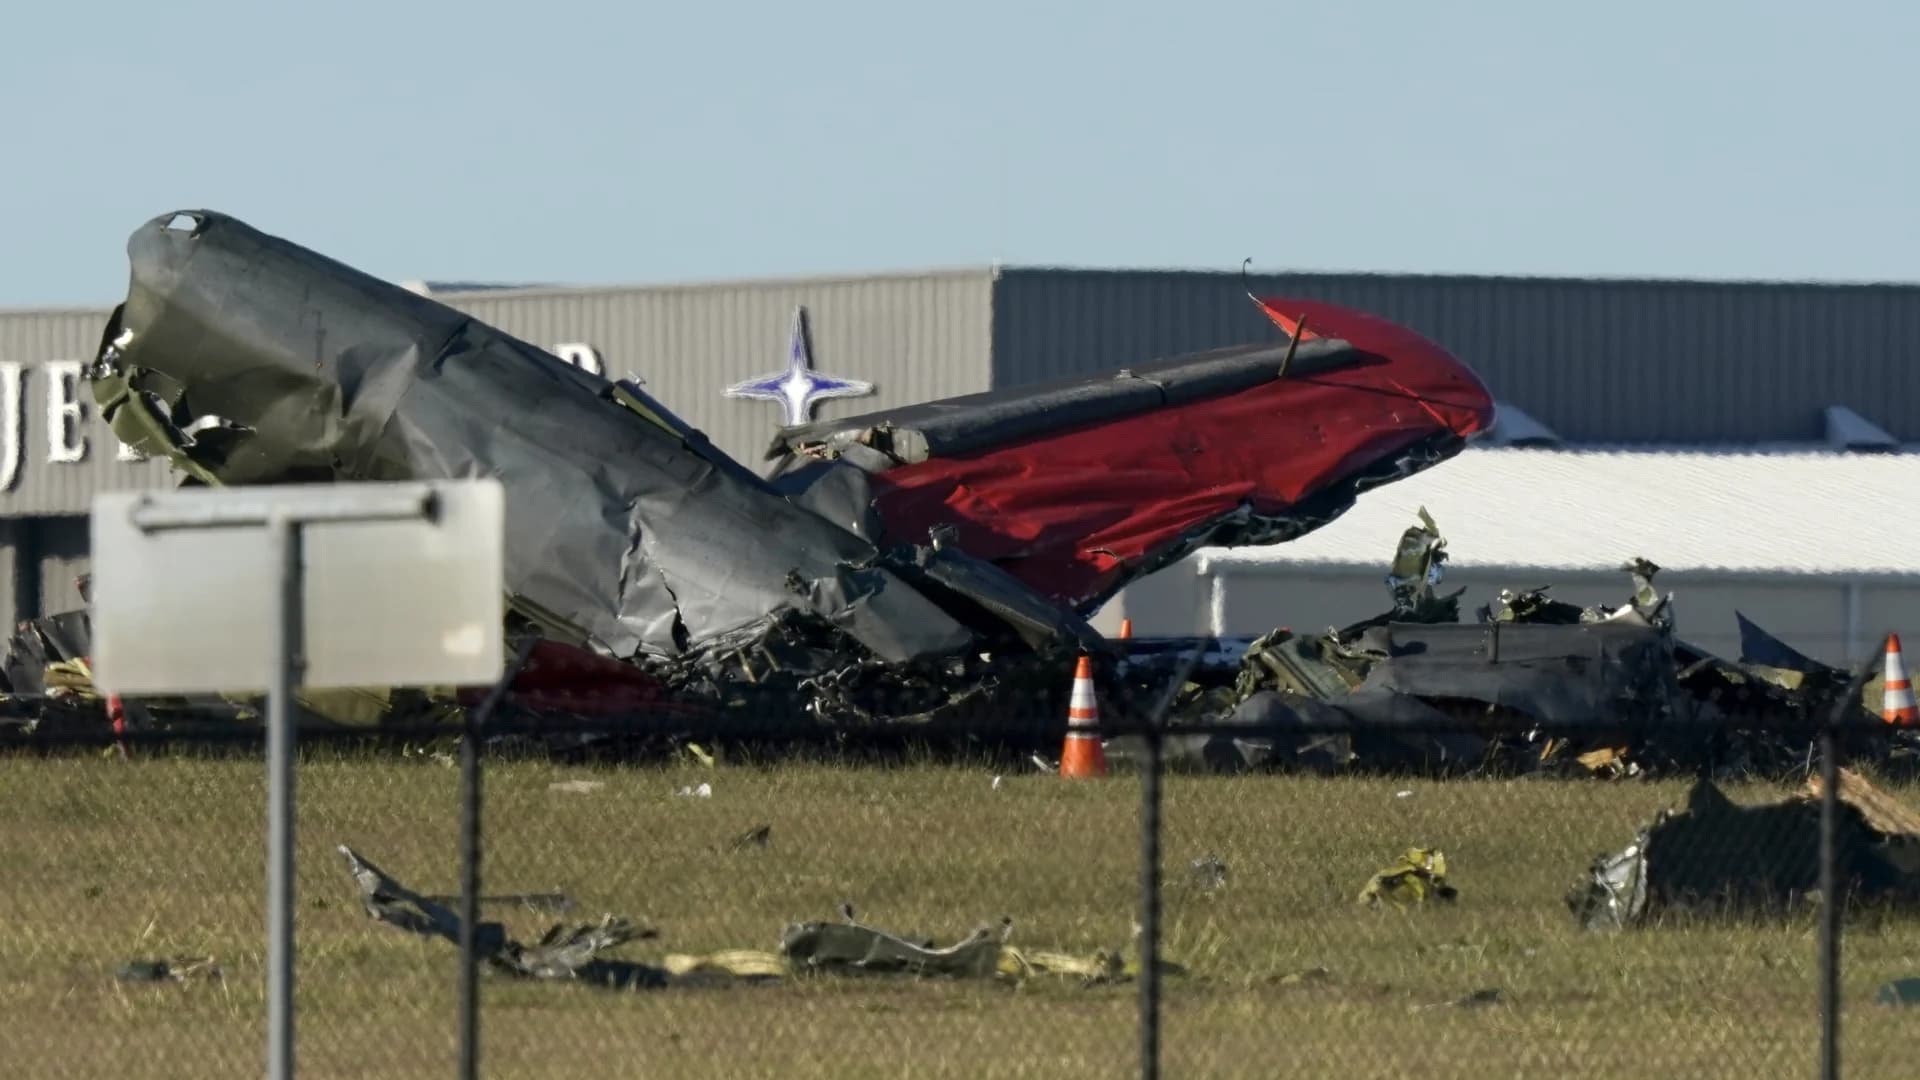 Dallas air show victims named; NTSB investigation underway